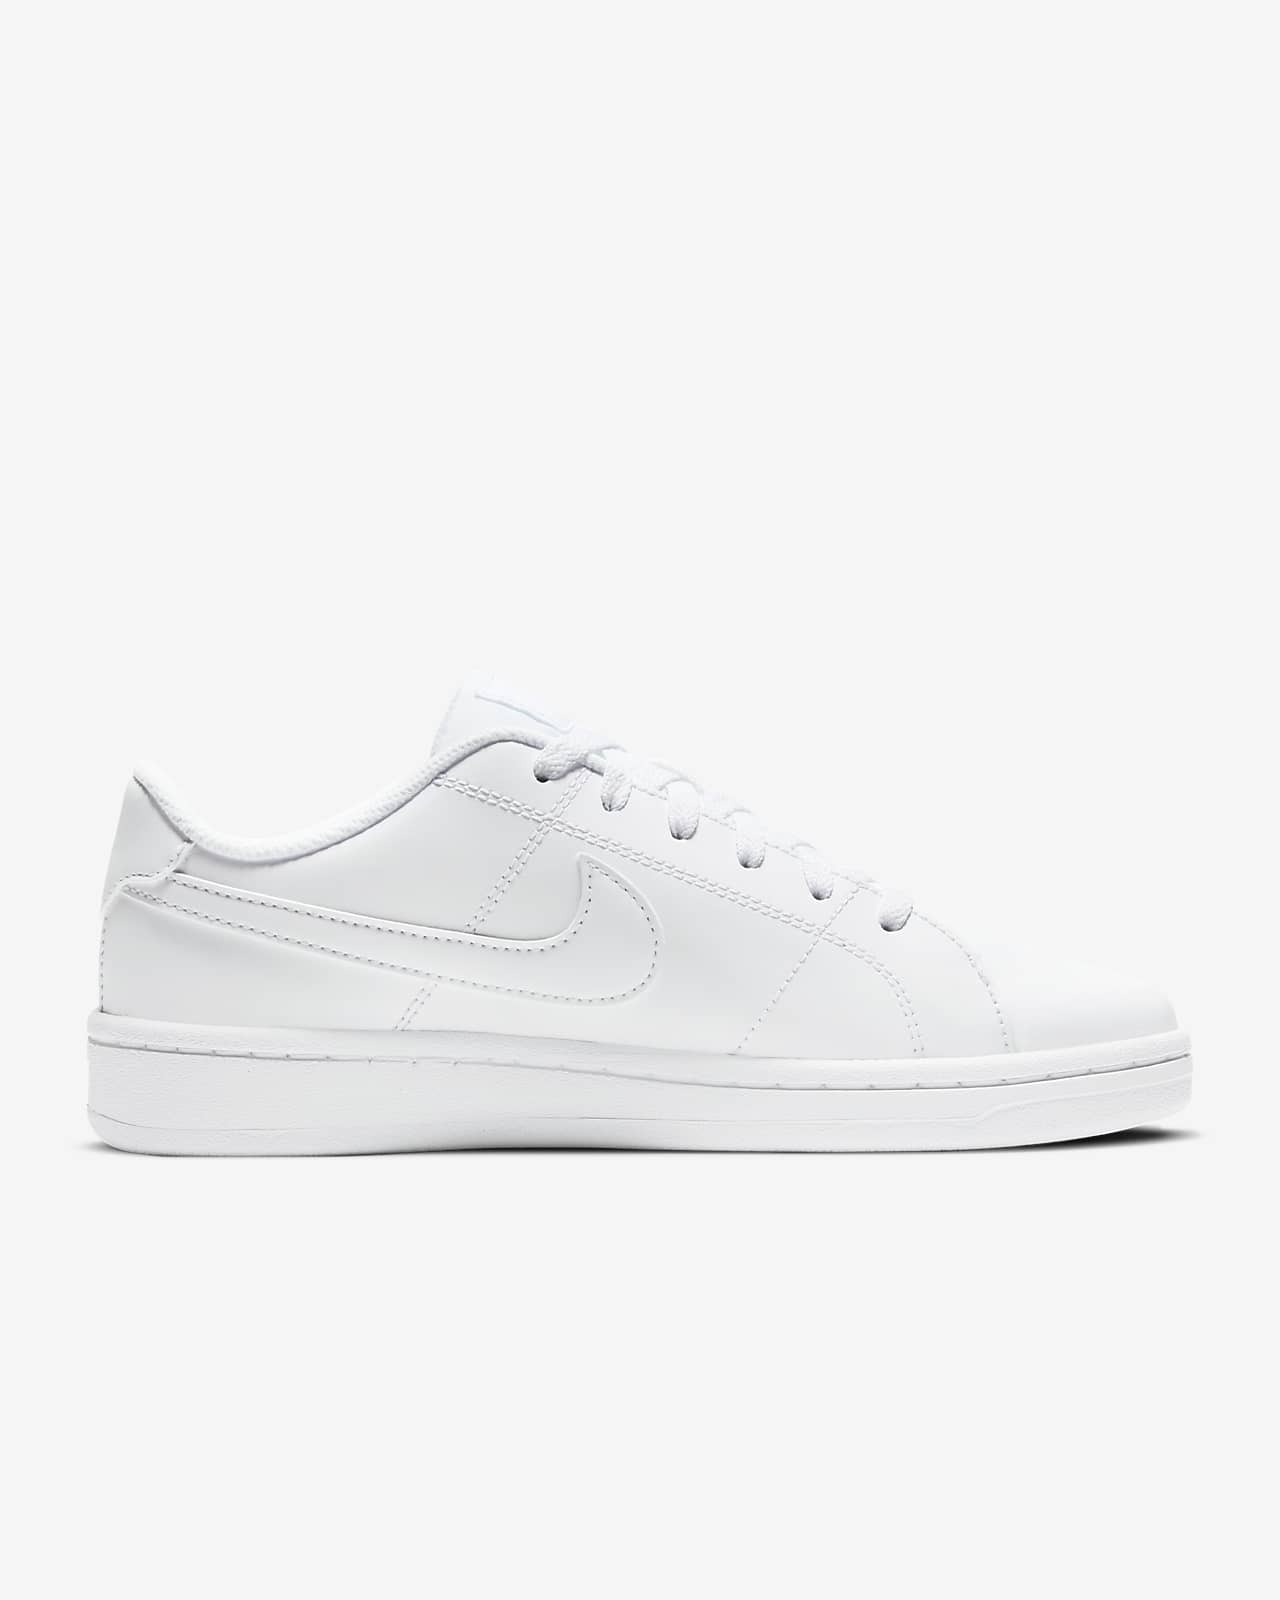 nike women's court royale casual sneakers